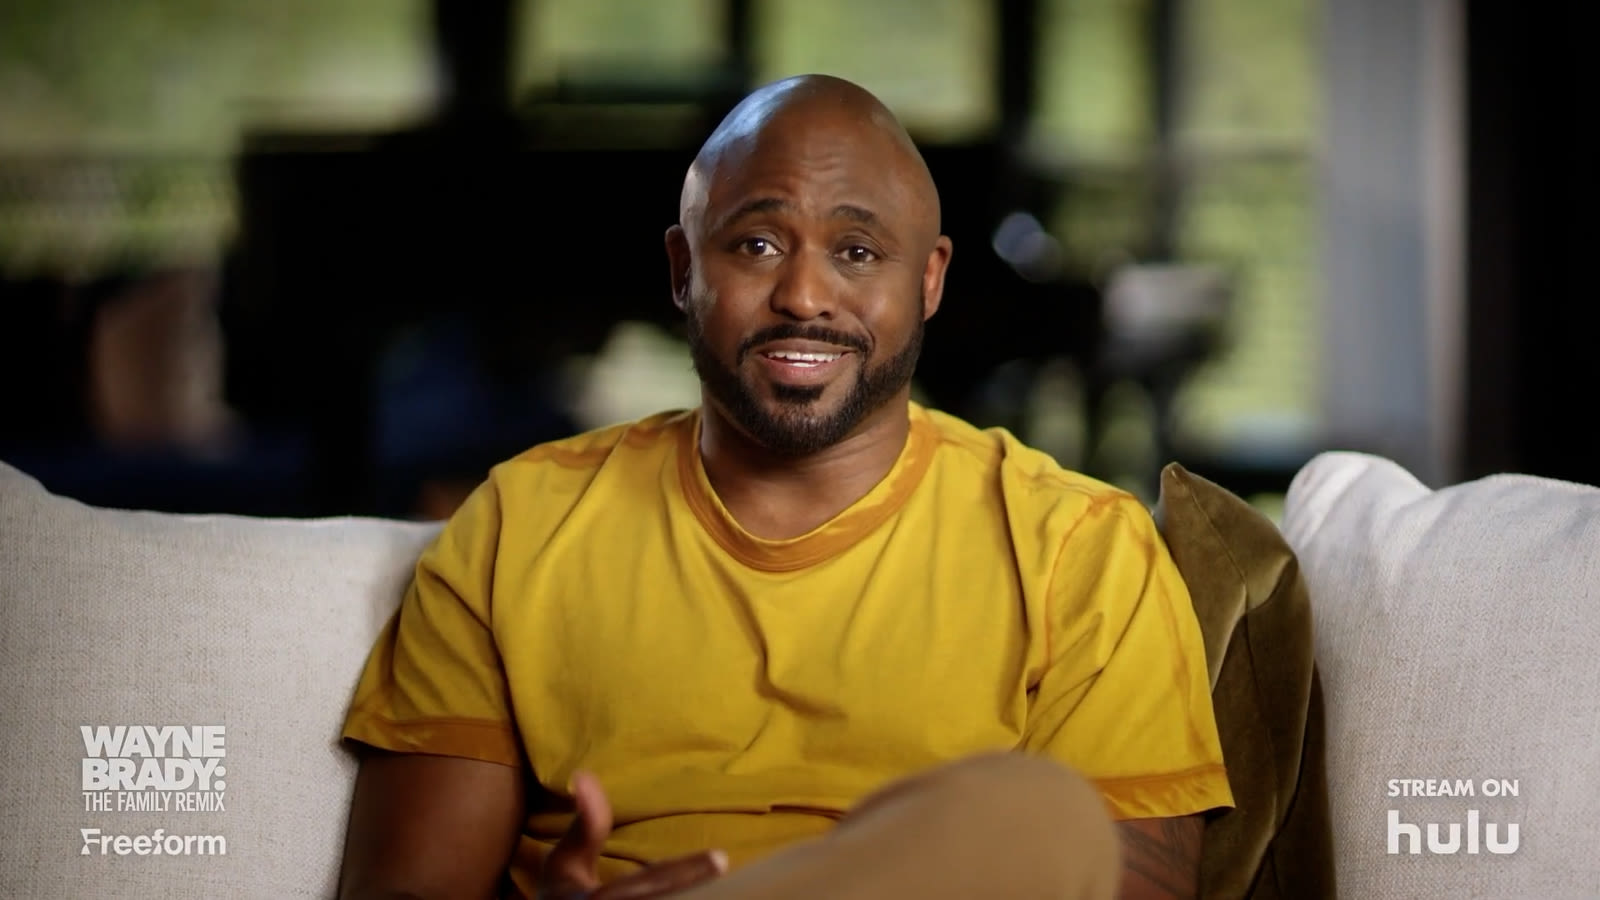 Wayne Brady gets real about unconventional family life in 'Wayne Brady: The Family Remix'